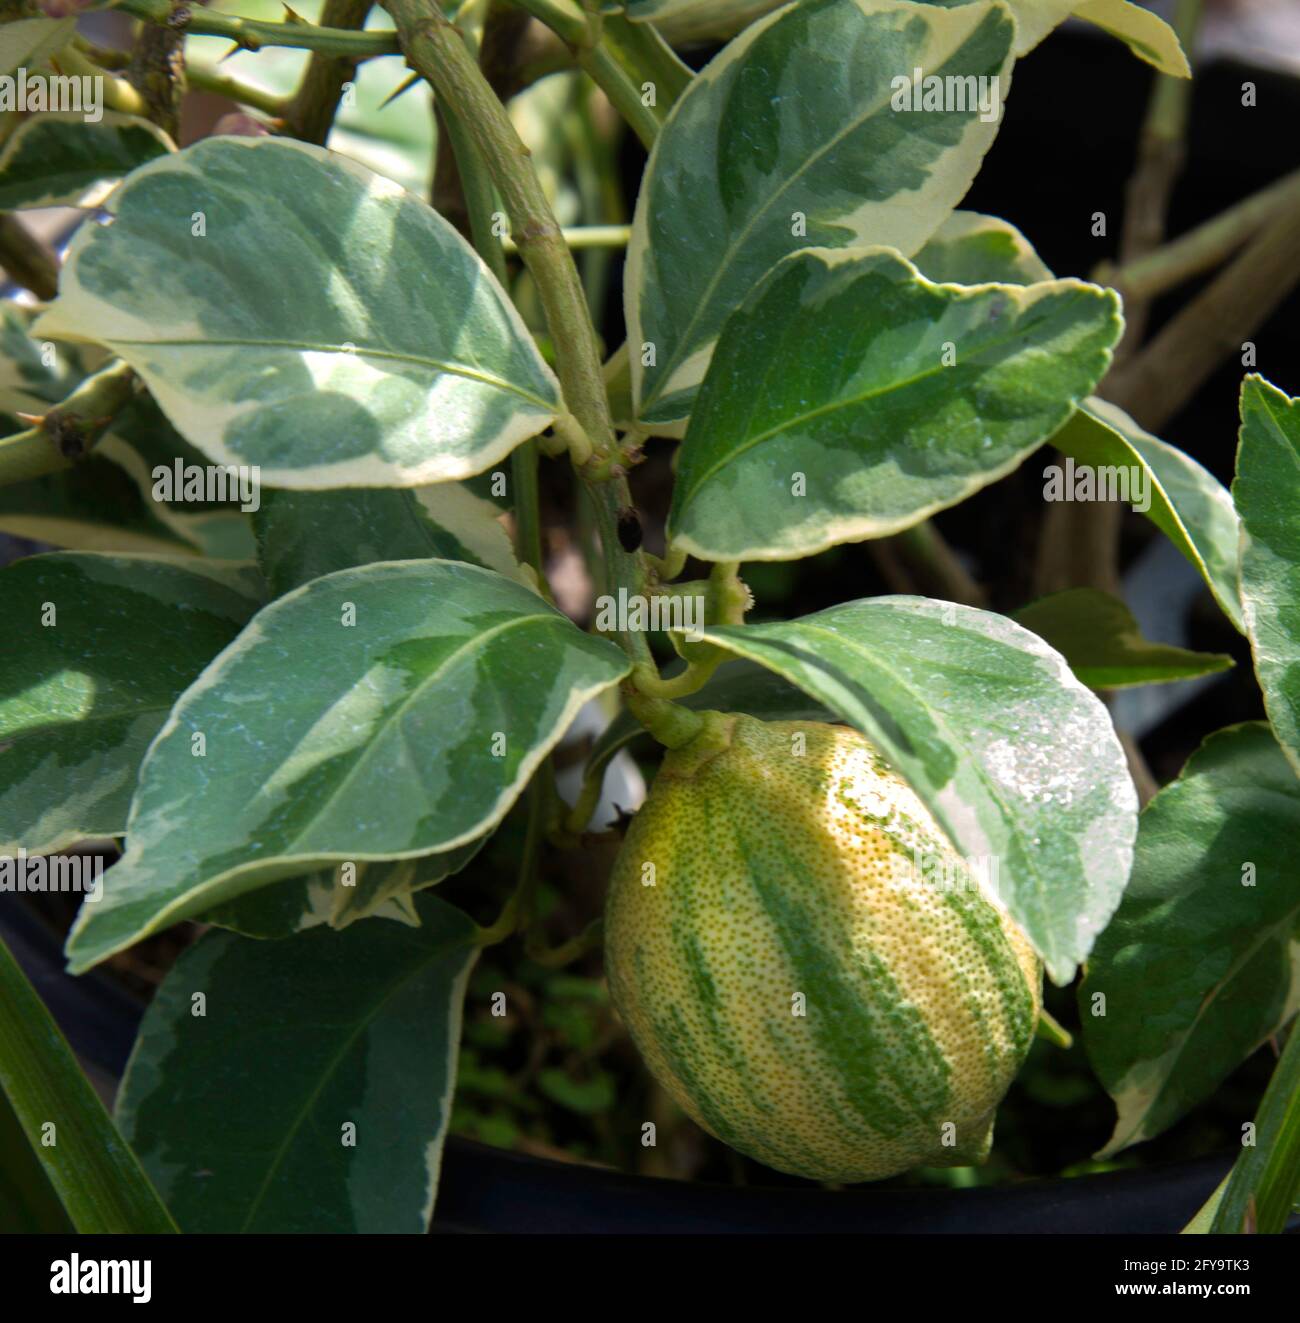 Variegated Lime, Citrus, Stock Photo